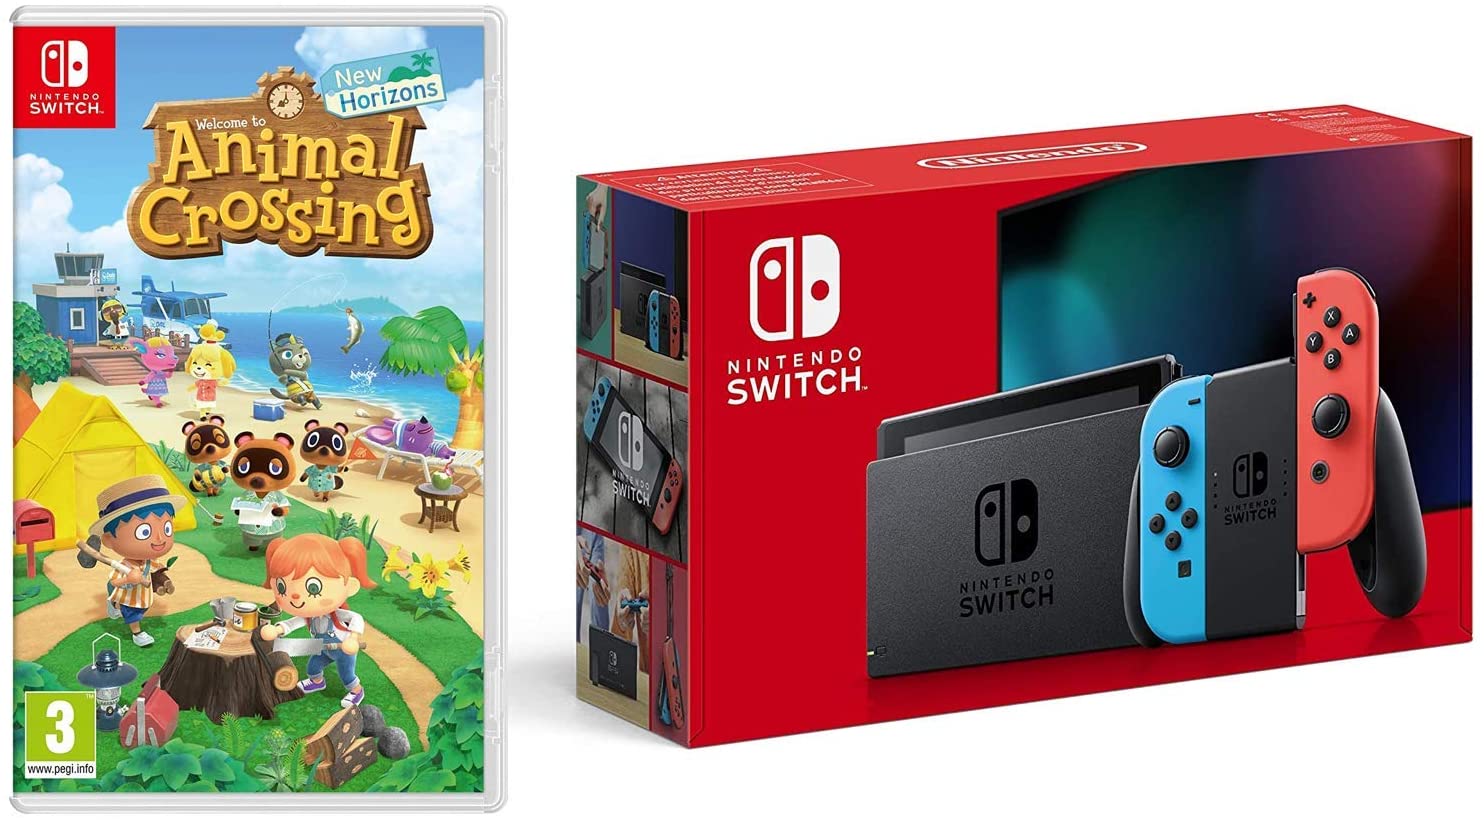 Image for The Nintendo Switch and Animal Crossing bundle is reduced again if you missed it on Prime Day